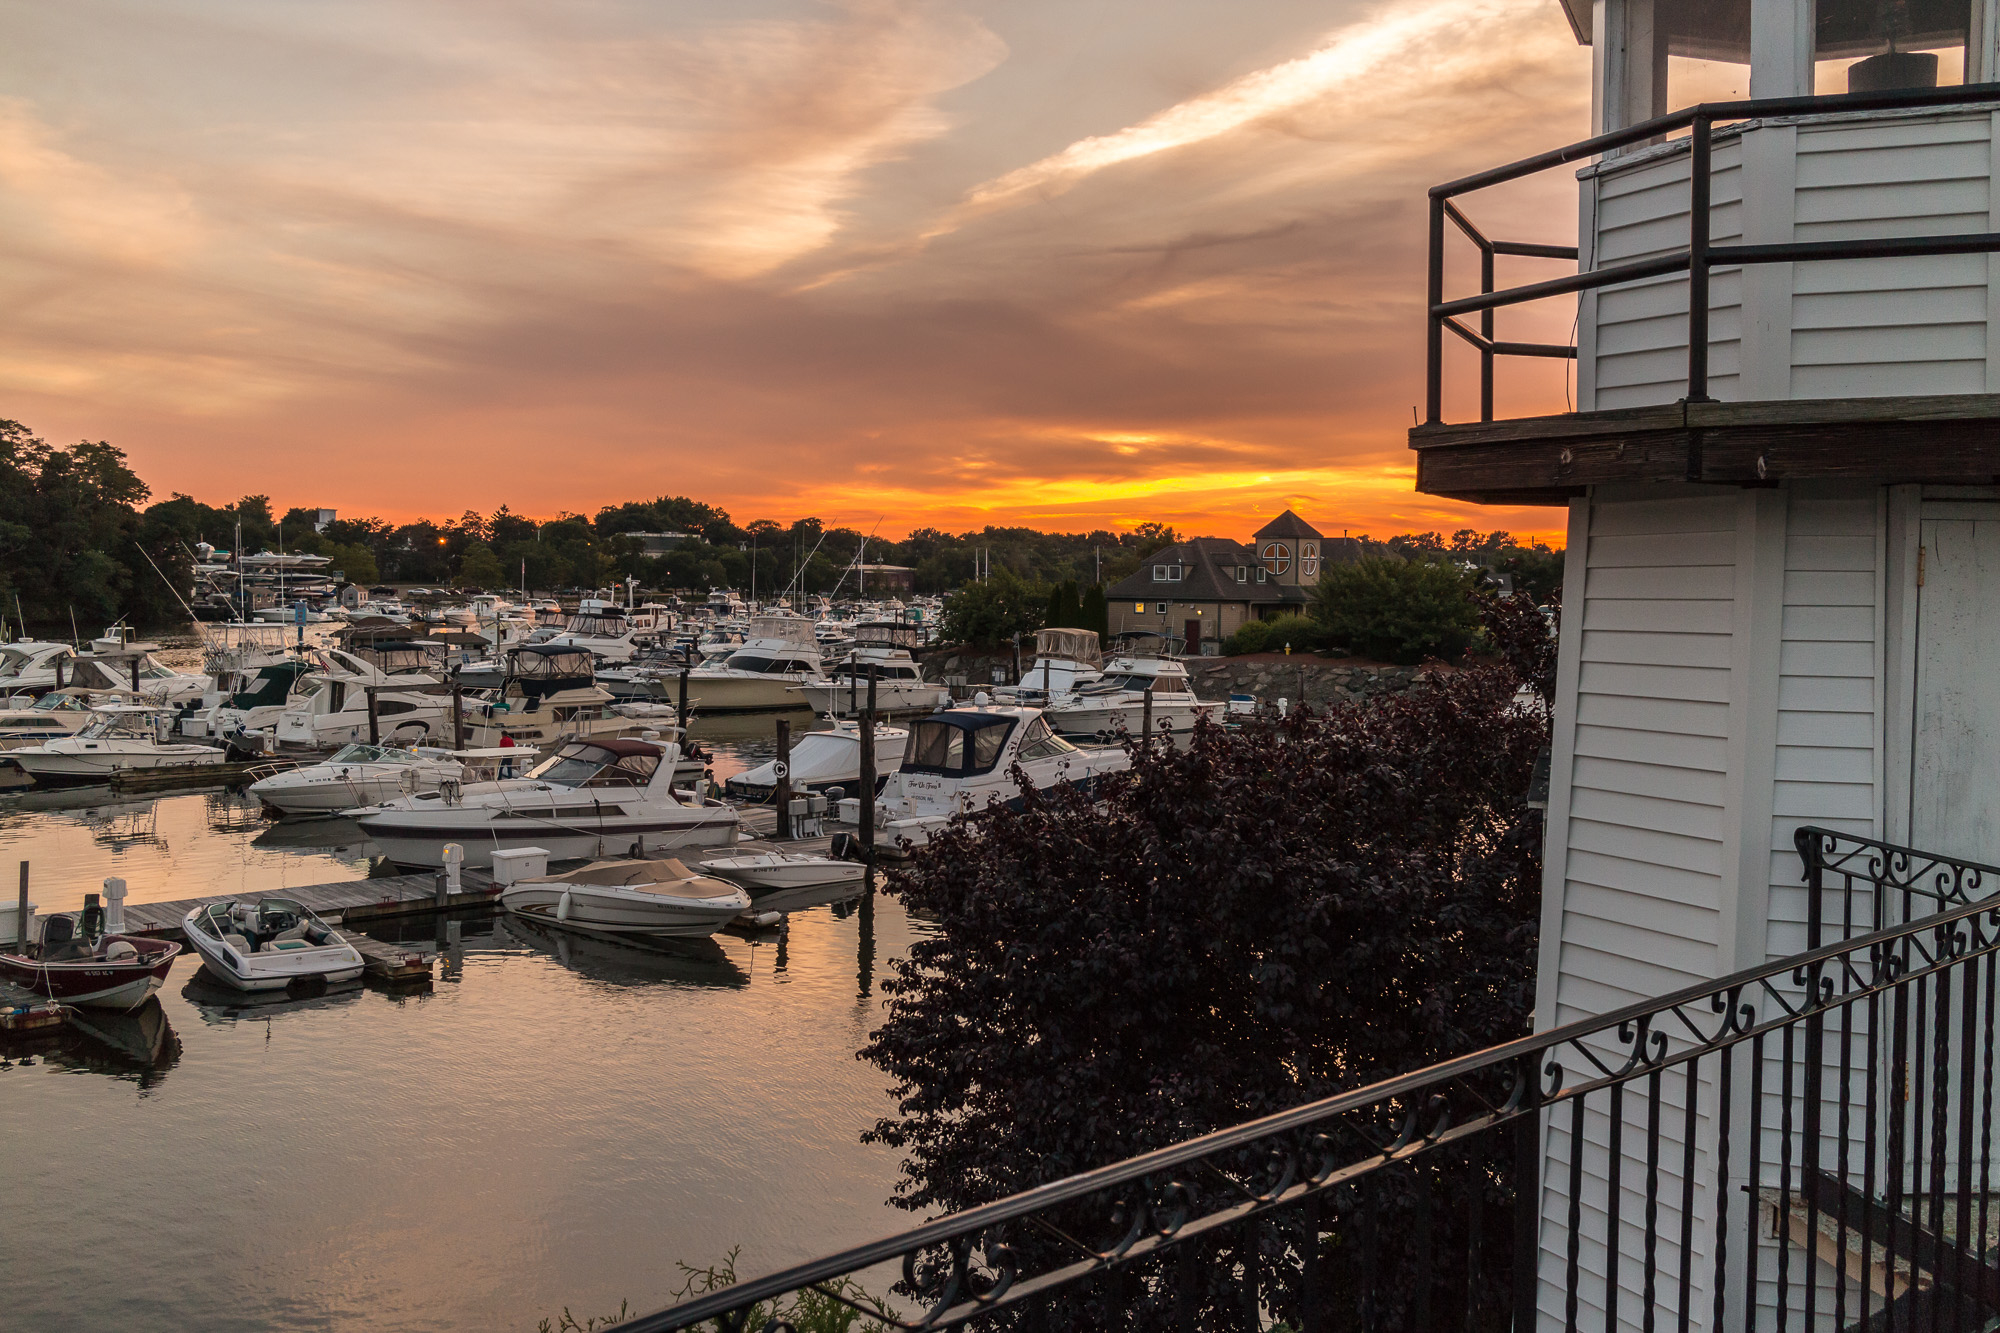 Harbor in Danvers, MA. Photo copyright Miceli Productions. http://MiceliProductions.com